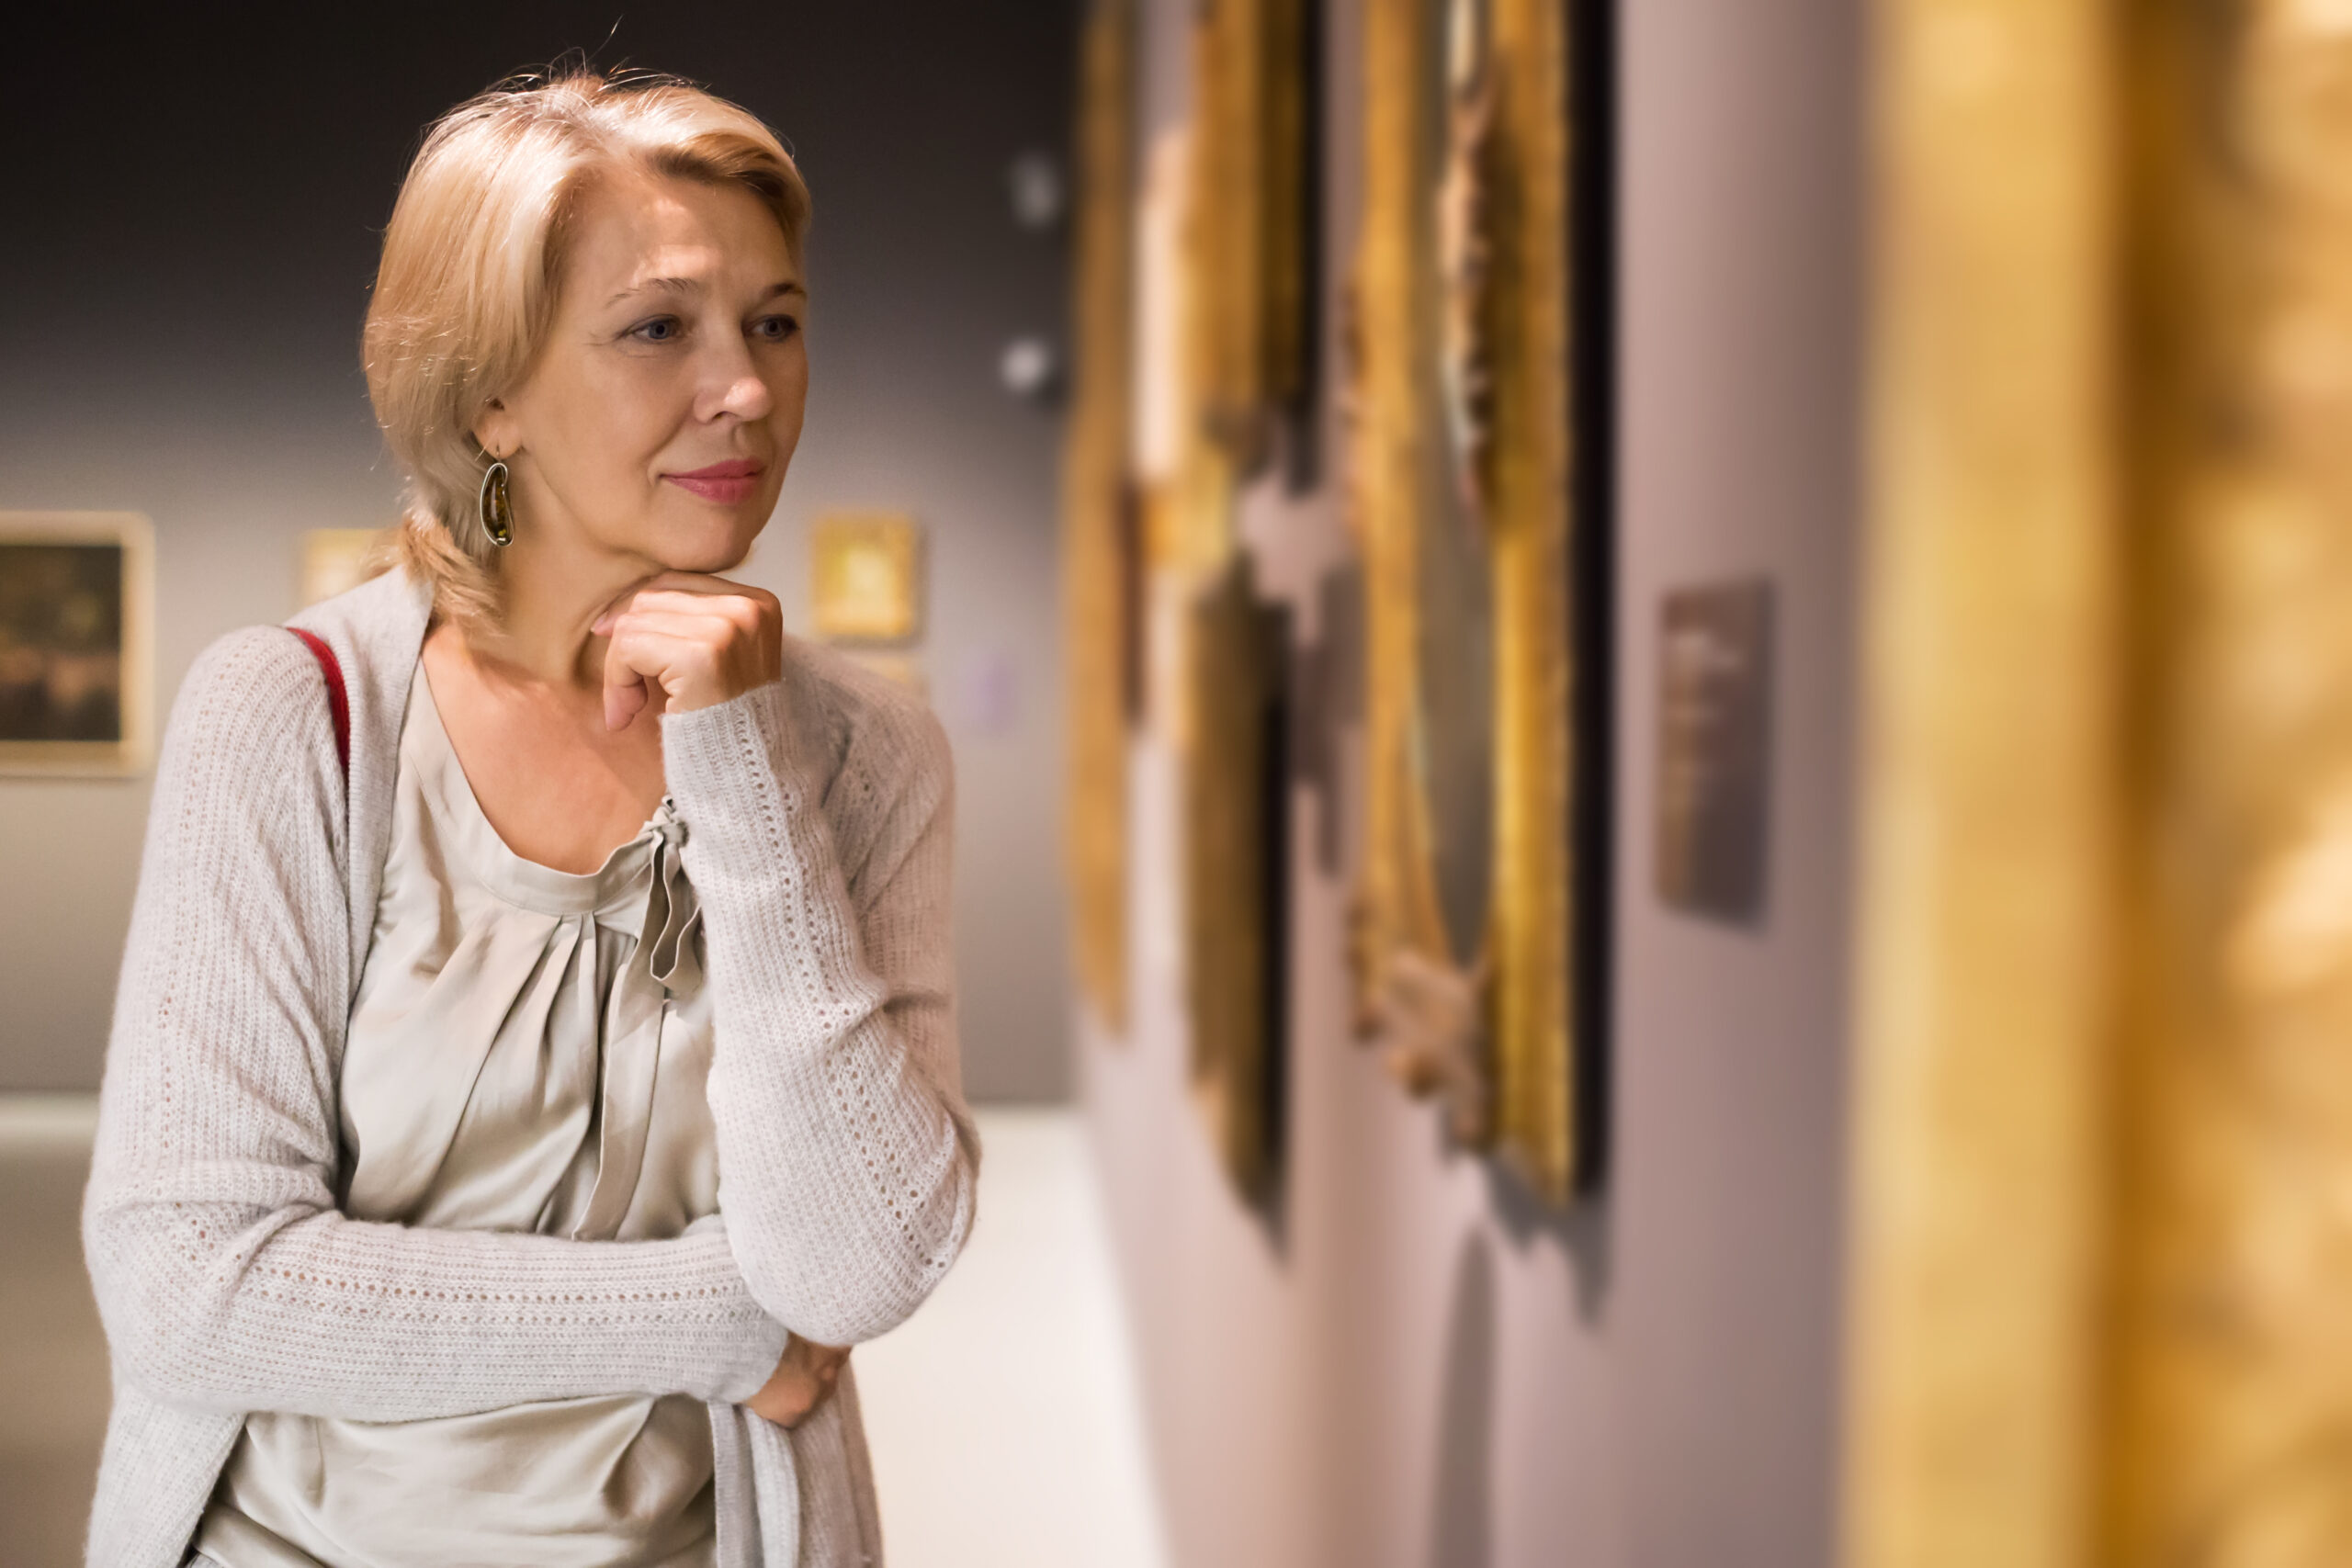 How to donate art when downsizing - woman near picture collection in a museum